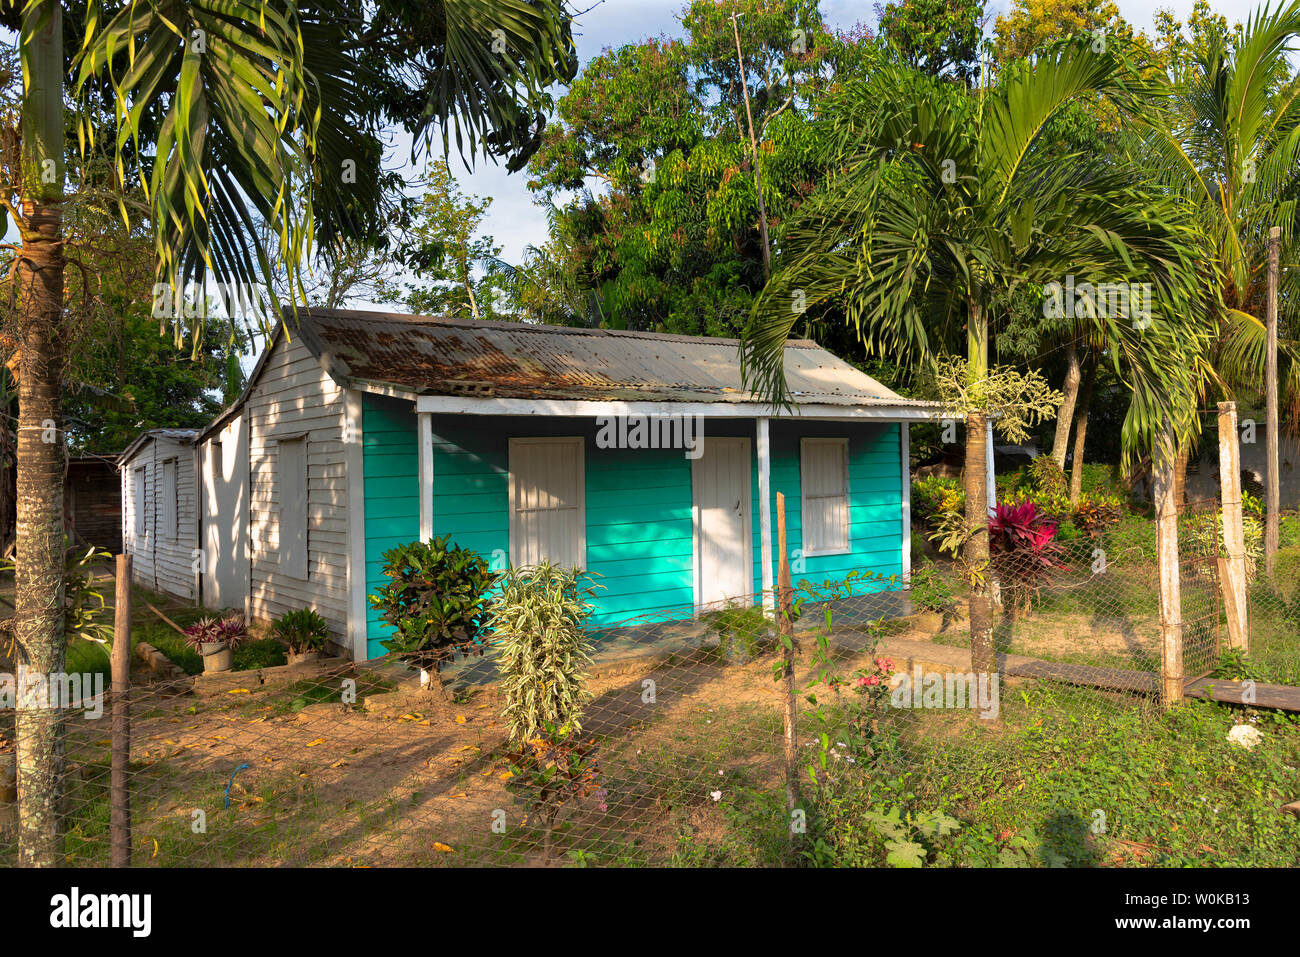 Typical colourful tobacco worker's small house in the rural village of San Juan y Martinez, Pinar del Rio Province, Cuba, Caribbean Stock Photo